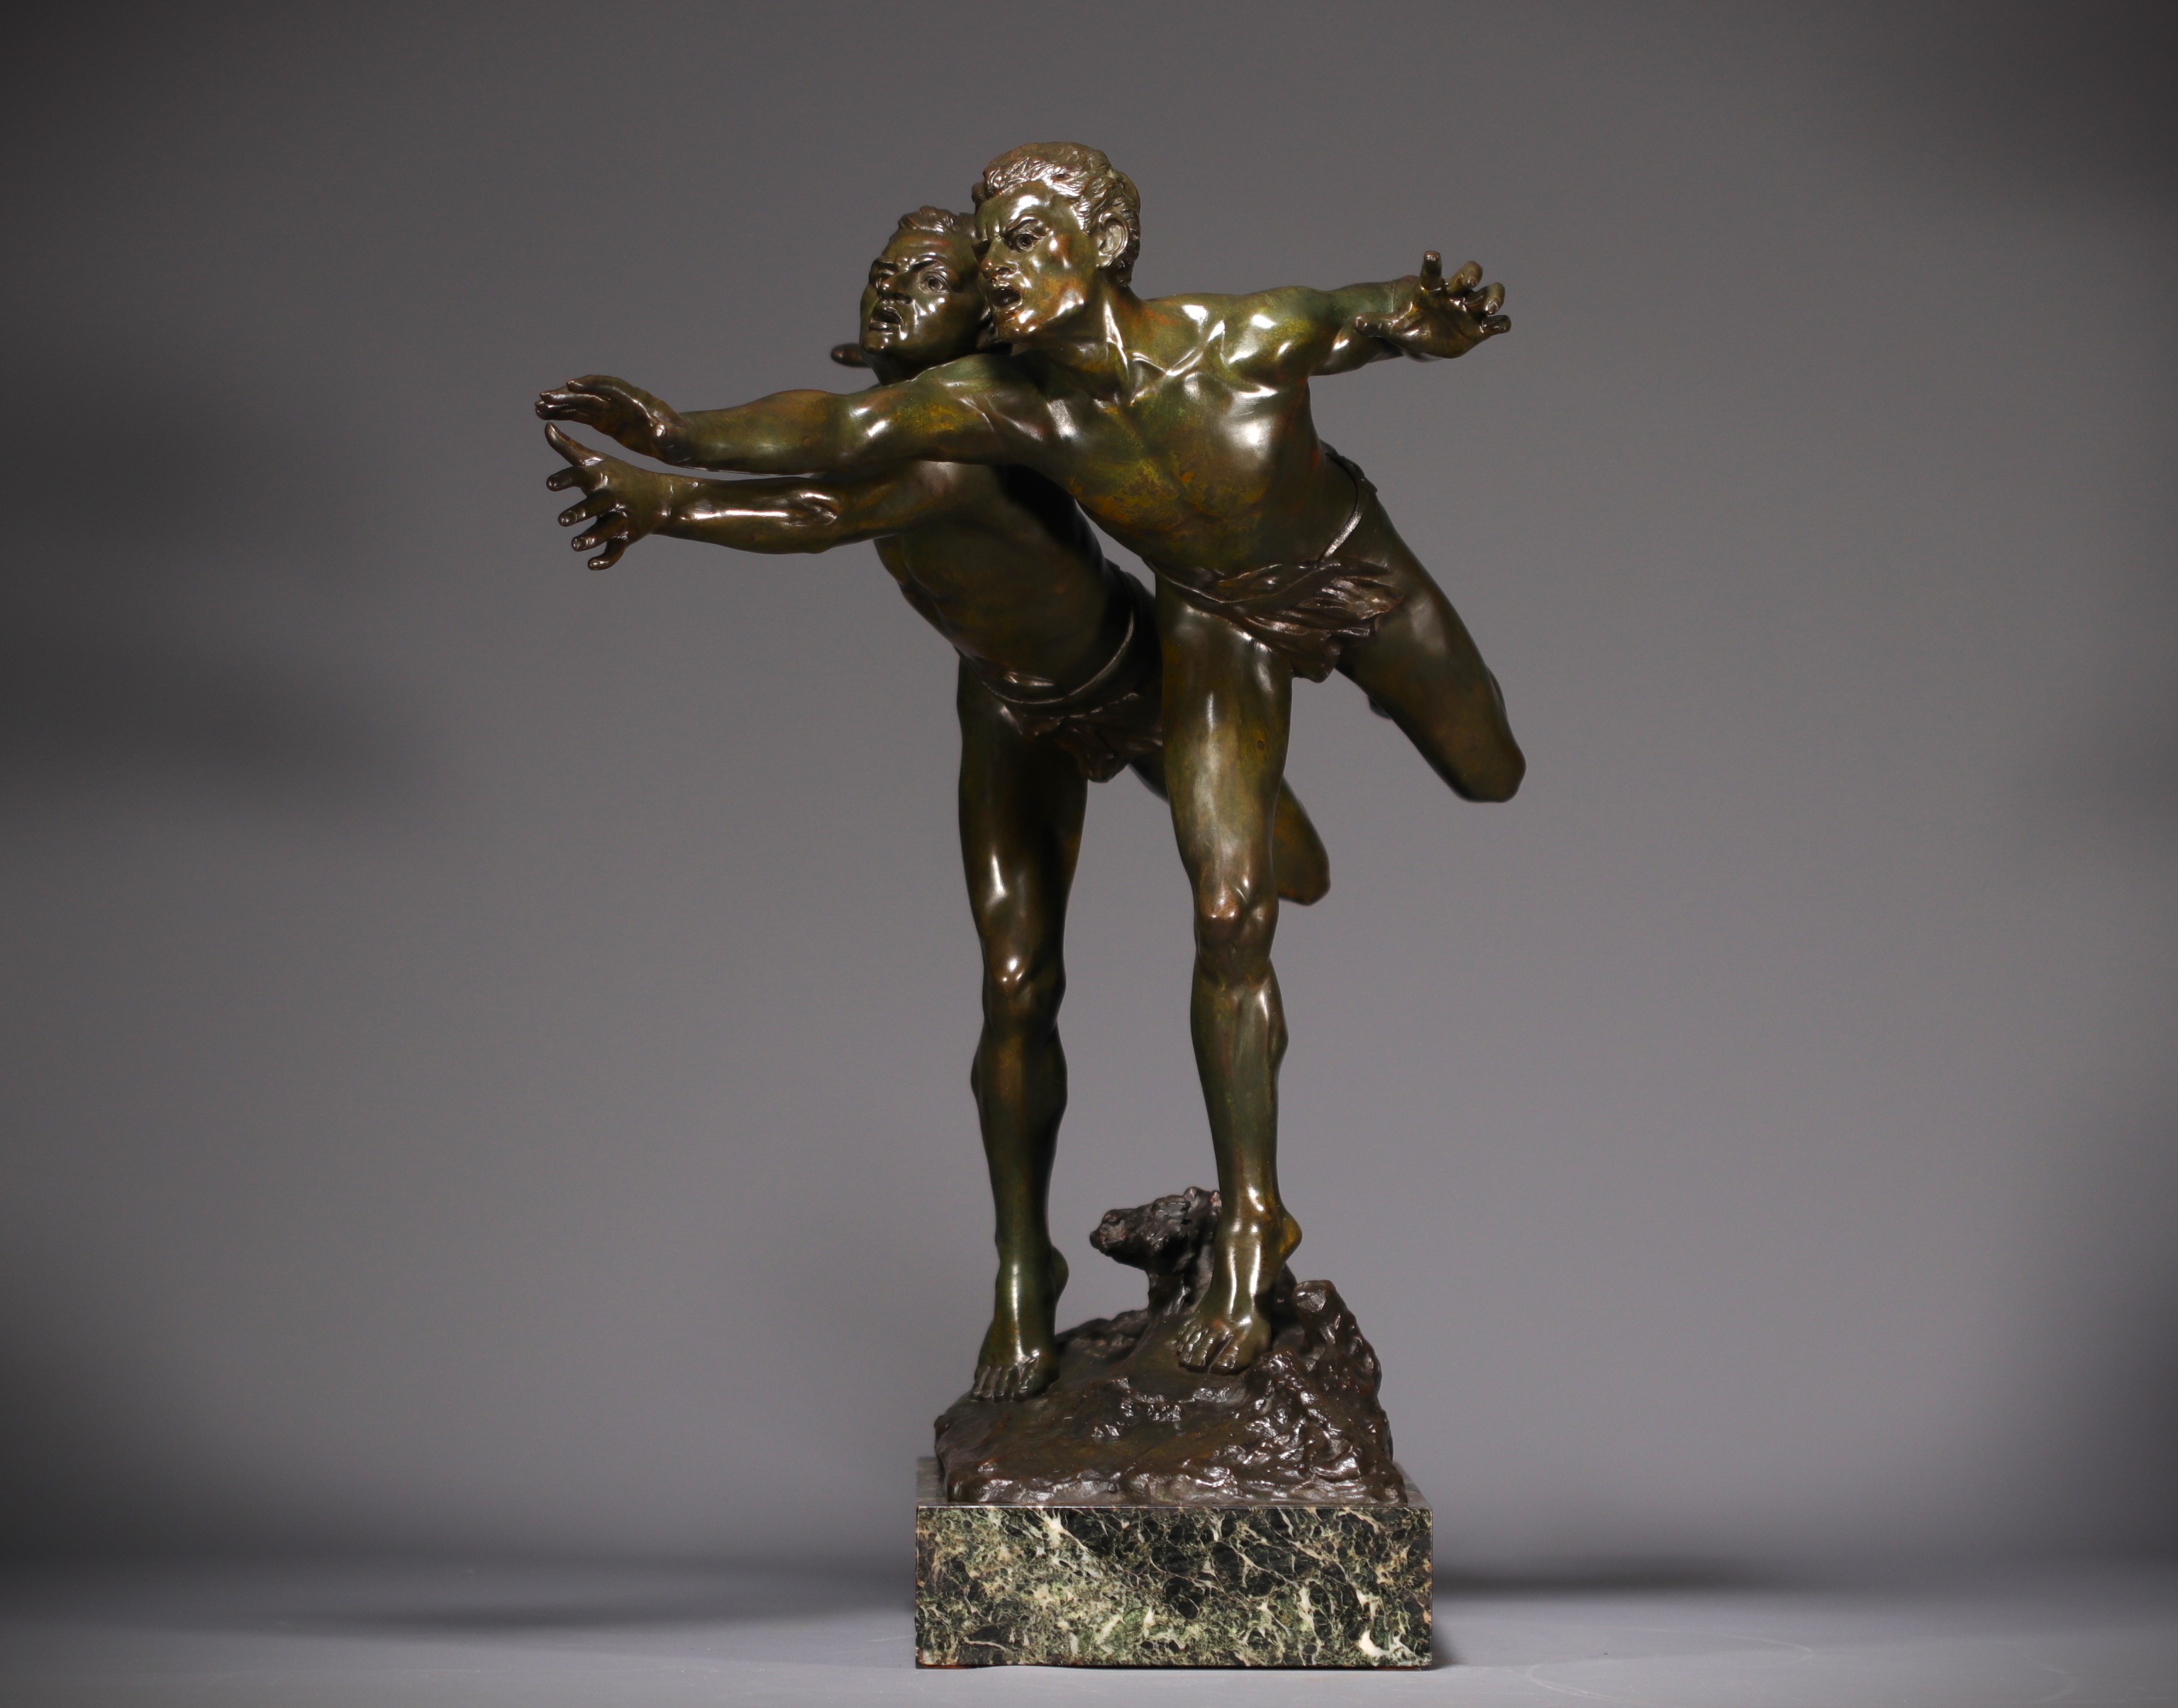 Edouard DROUOT (1859-1945) "La course" Bronze with green and brown shaded patina, on a marble base,  - Image 3 of 8